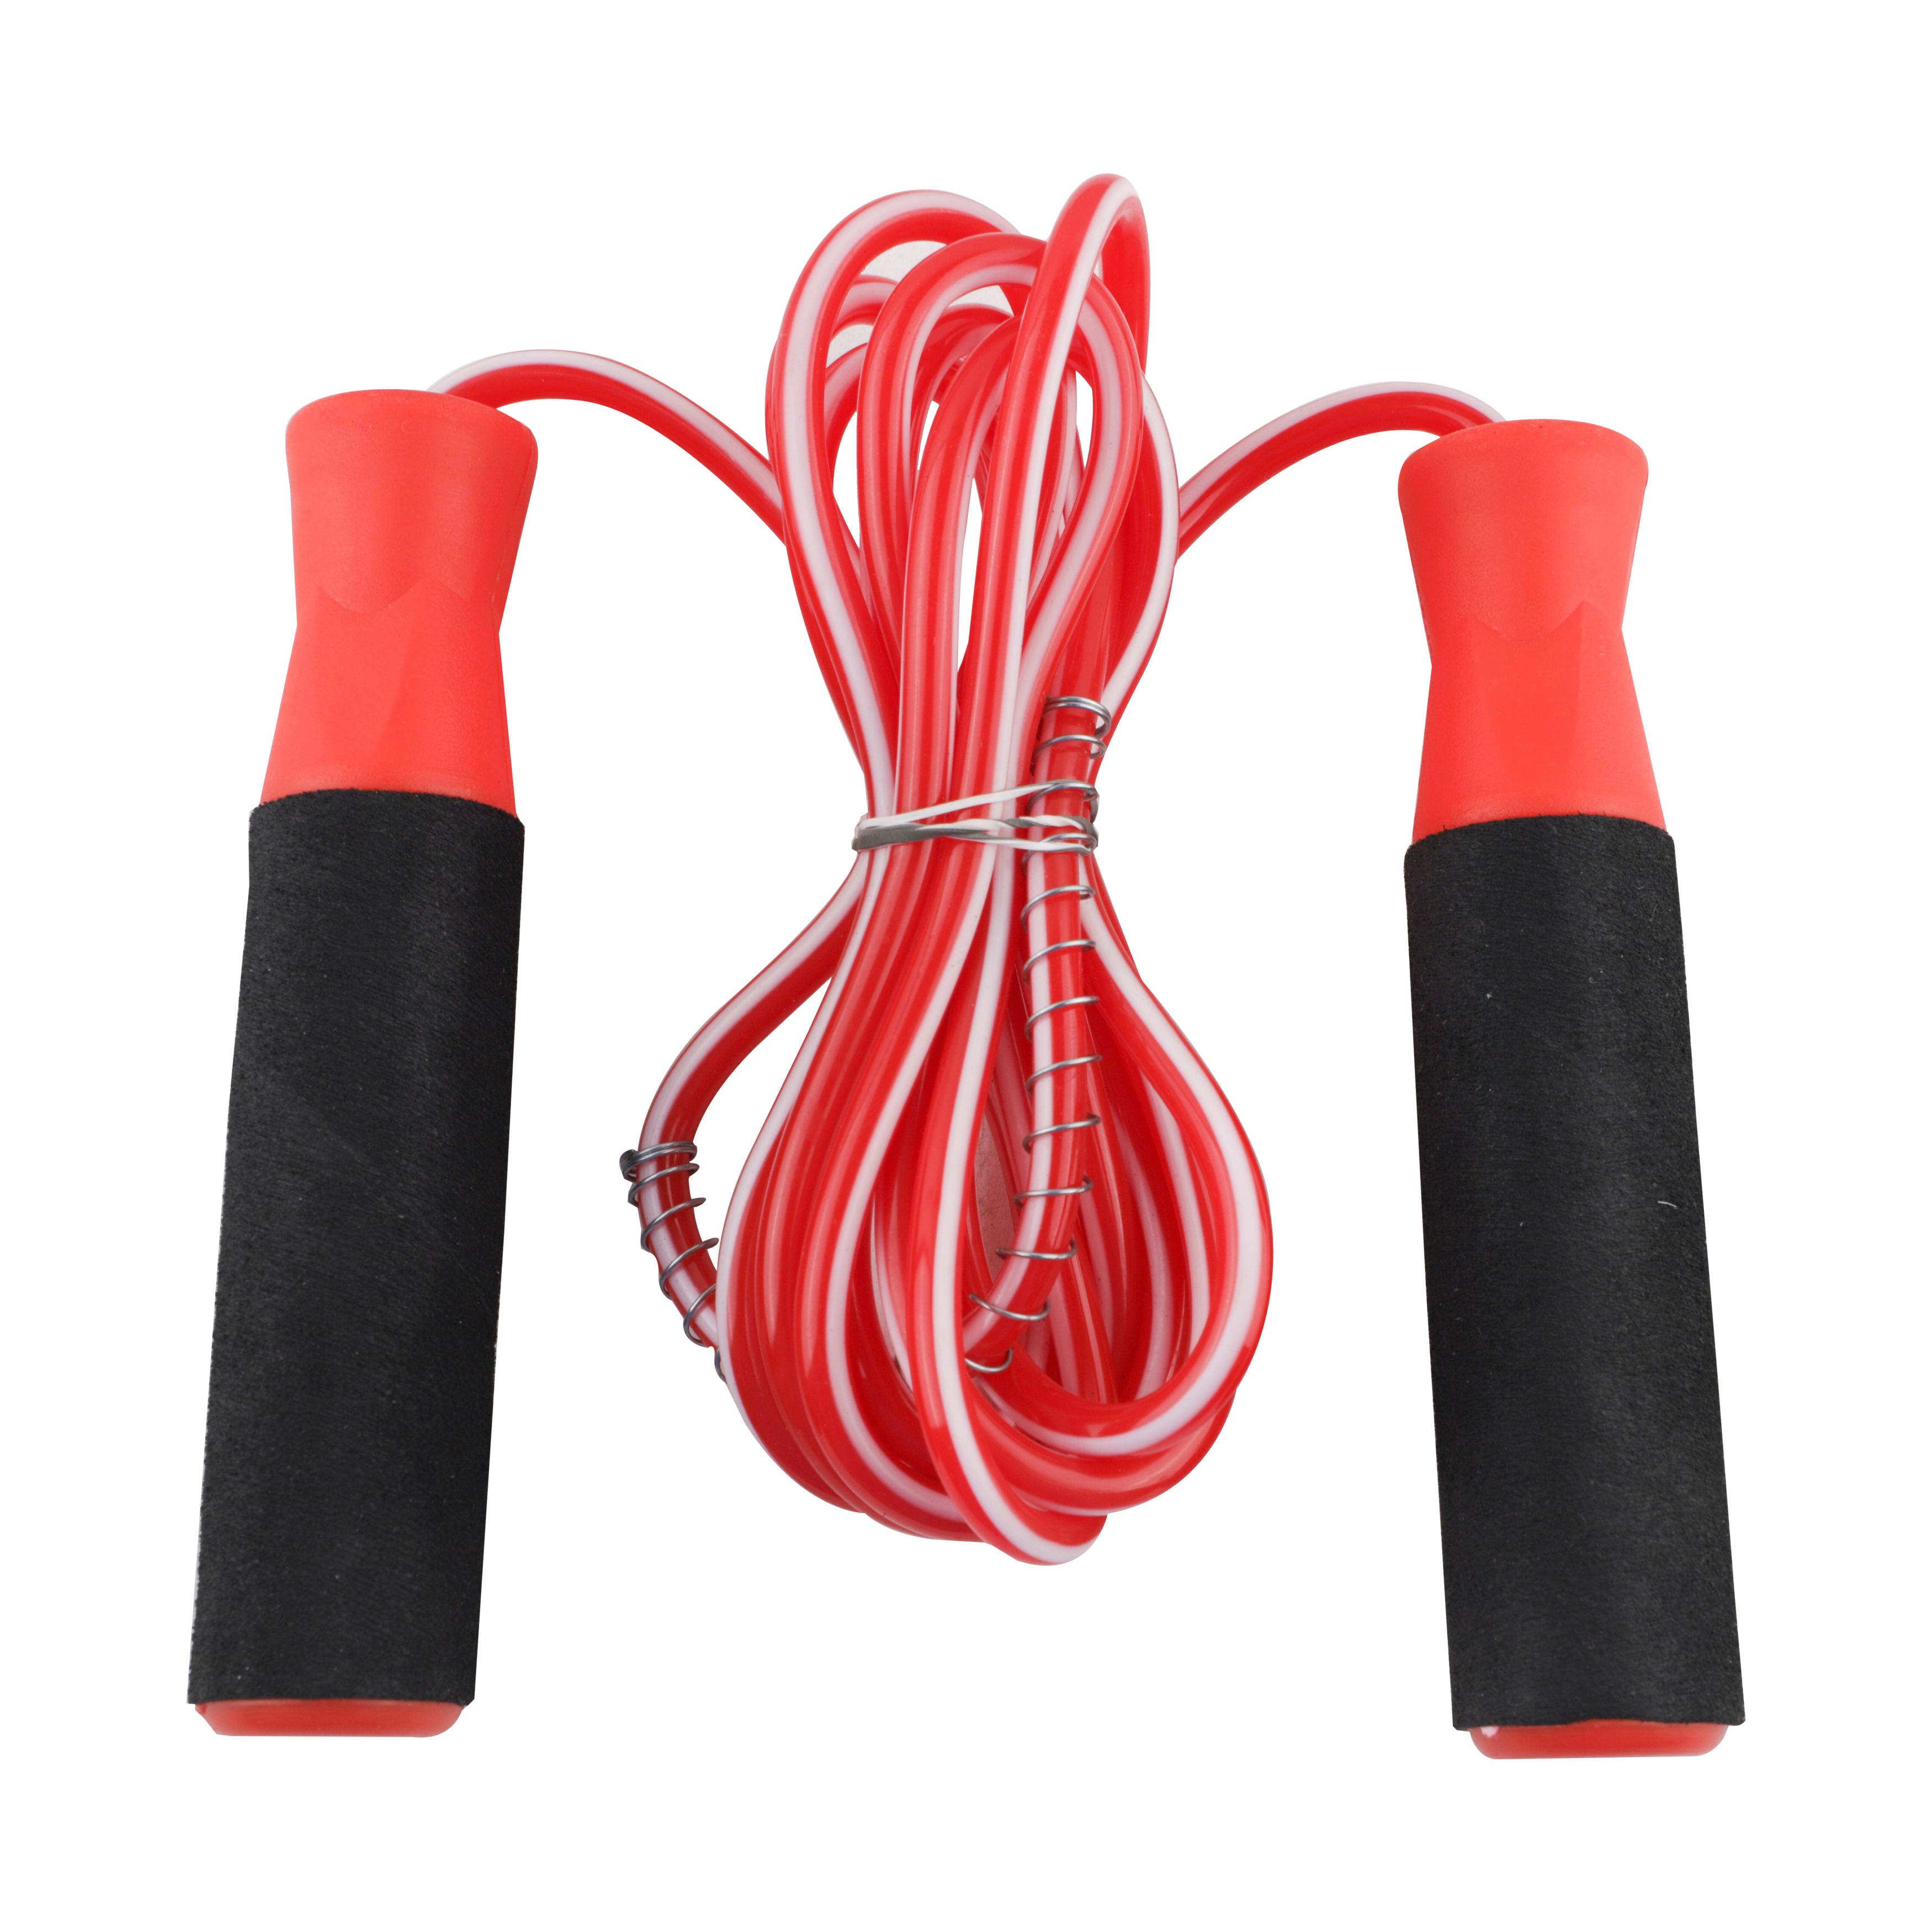 Steelbird Skipping-Rope for Men, Women, Weight Loss, Kids, Girls, Children, Adult - Best in Fitness, Sports, Exercise, Workout (RED)